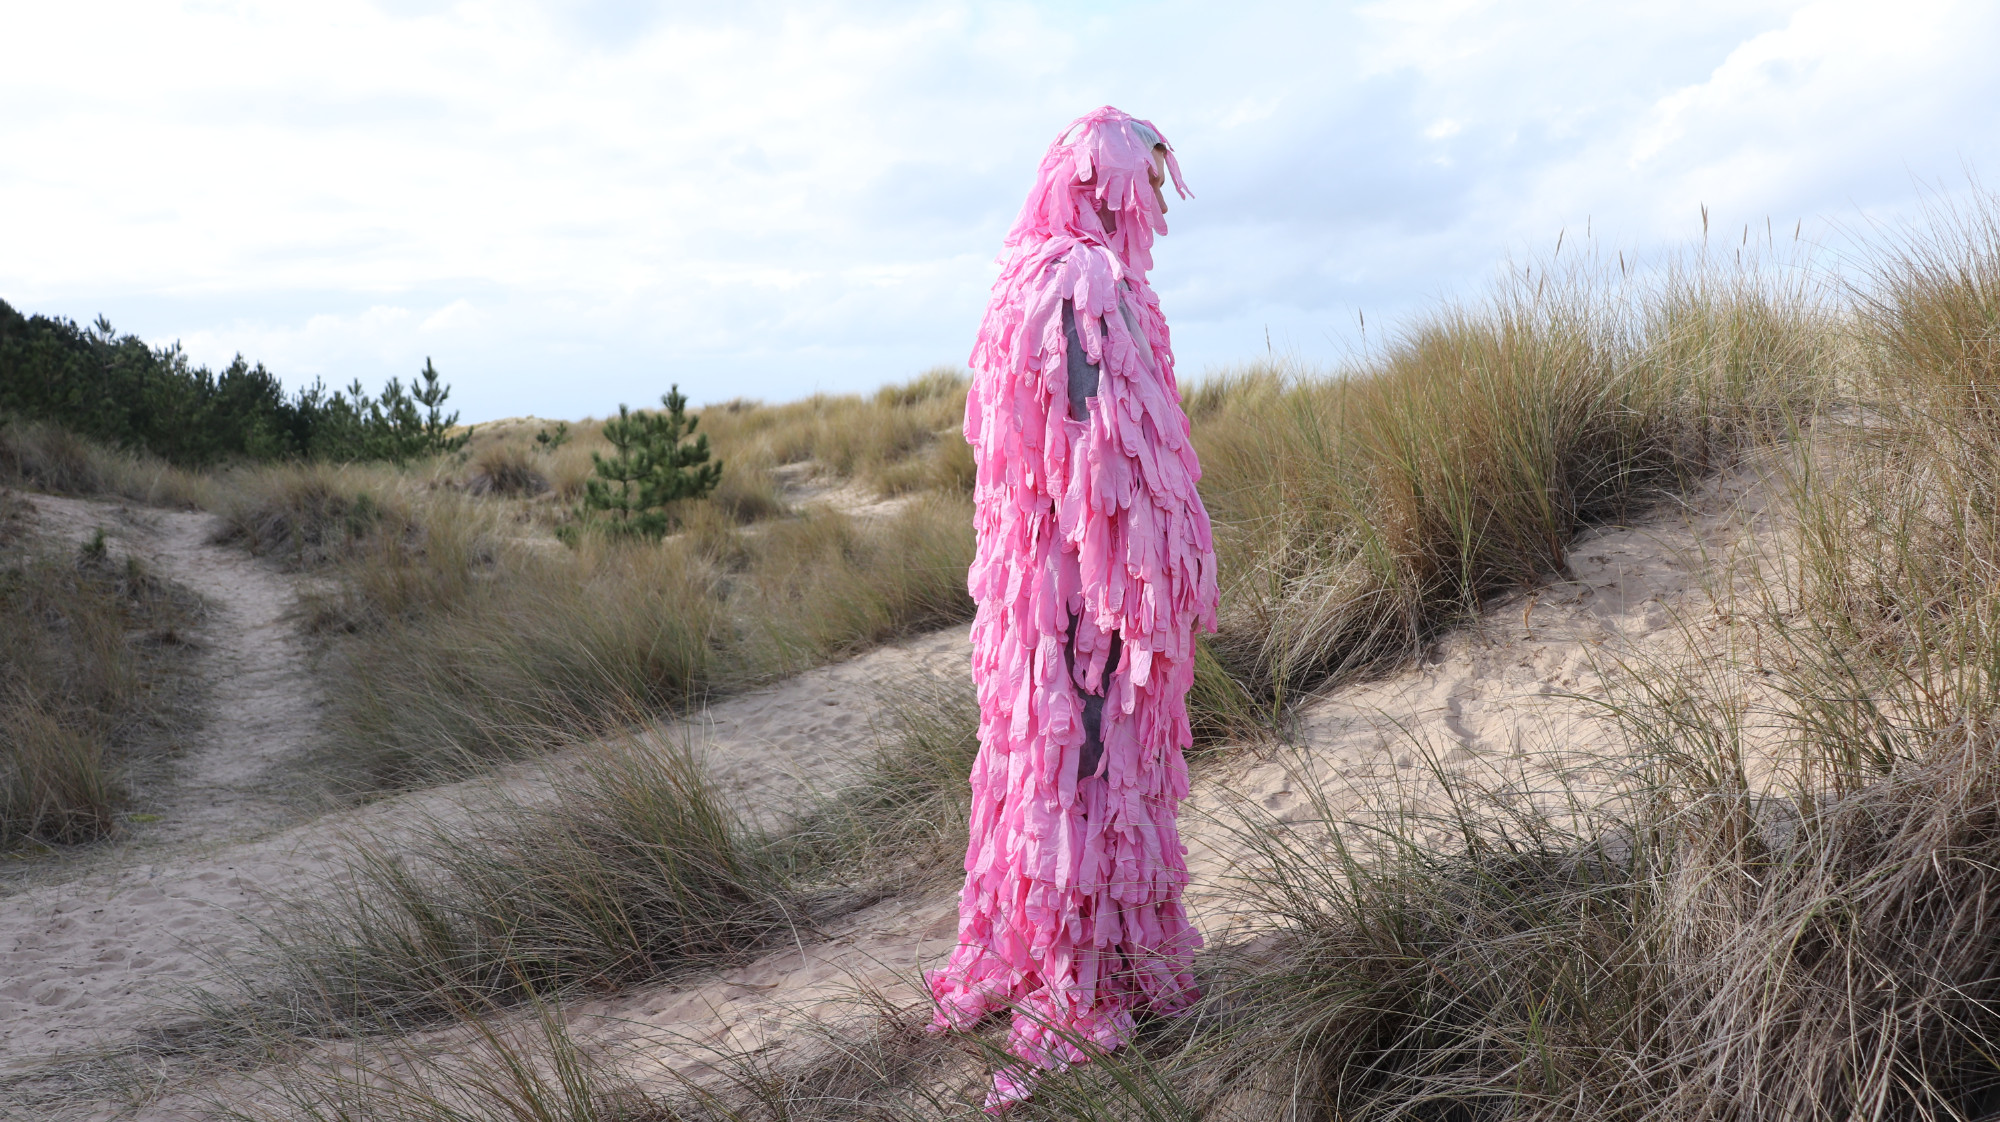 Suit Series, Expanded Touch, Full body suit made from pink latex gloves, Image taken on Canon 800d